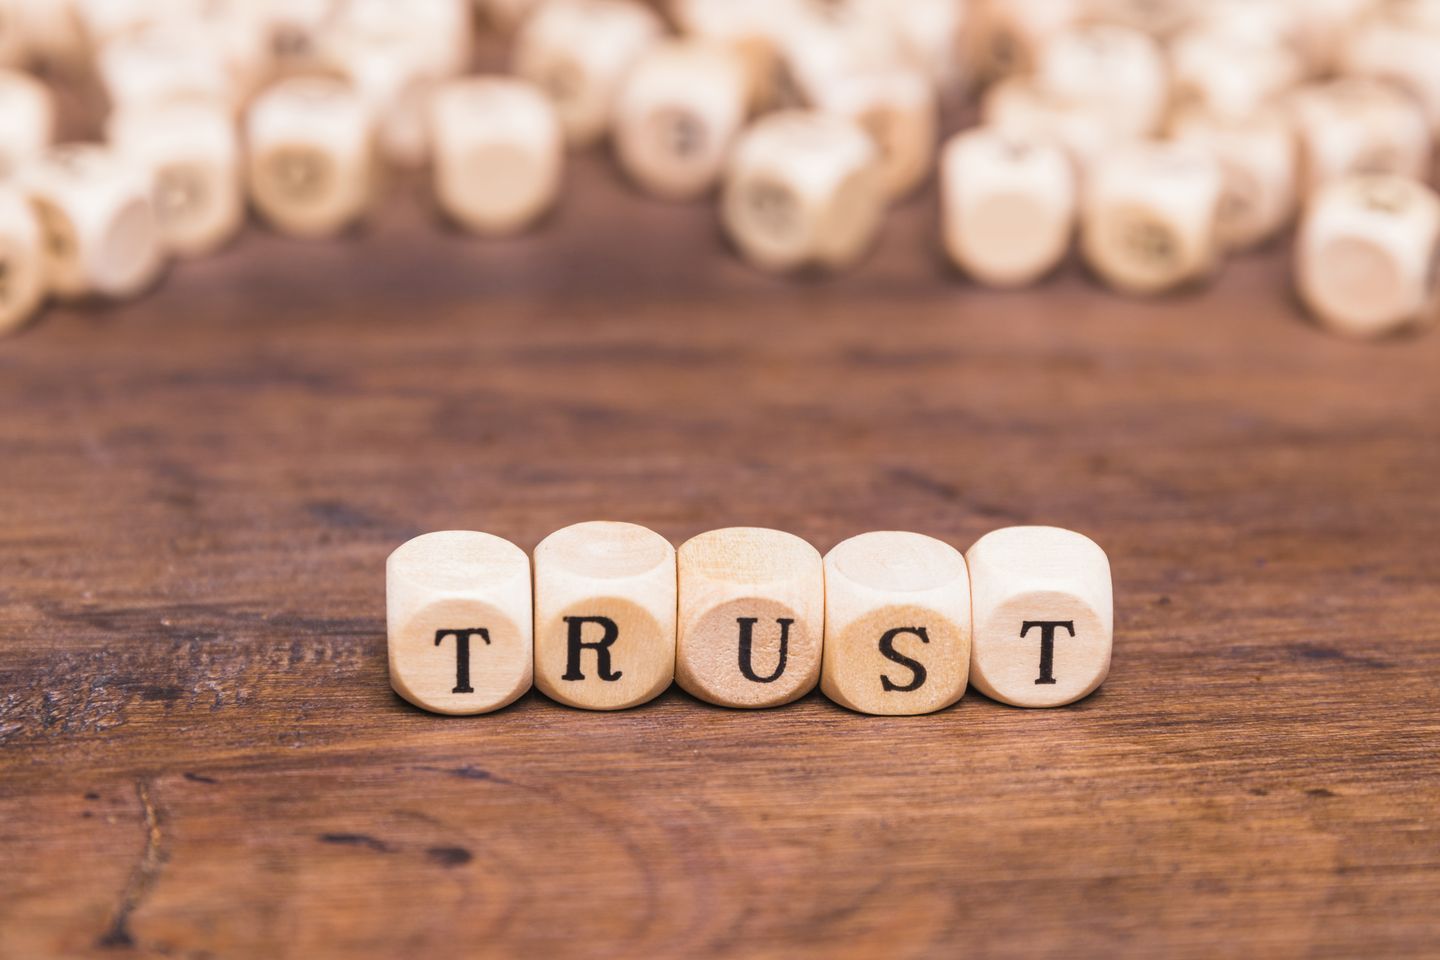 SEO Benefits Of Building Brand Trust - The Key To SEO Success